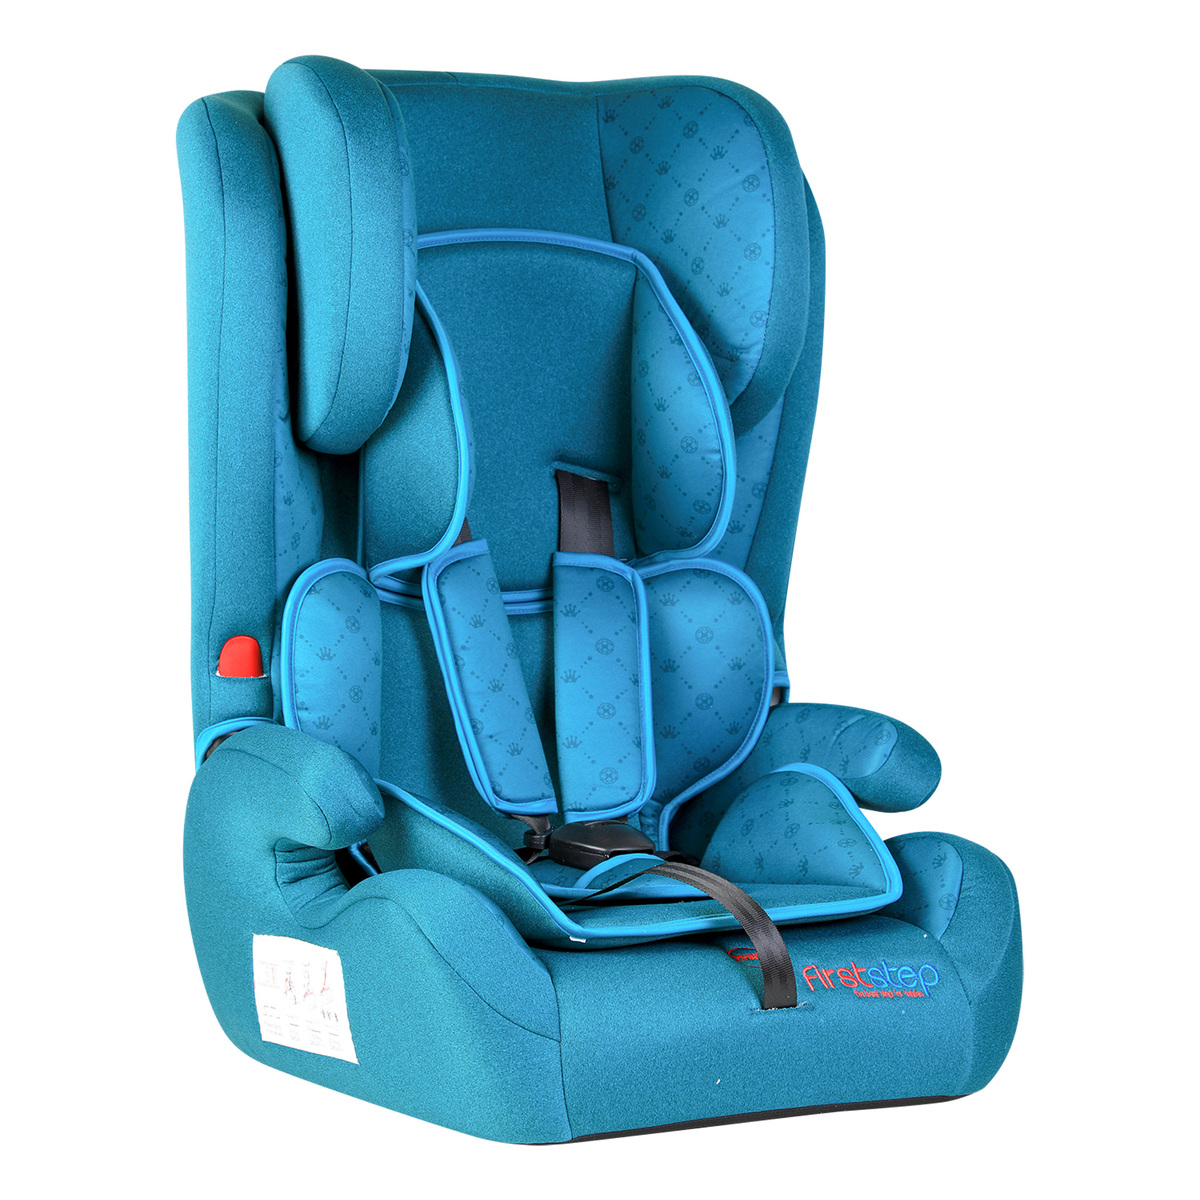 First Step Baby Car Seat HB601